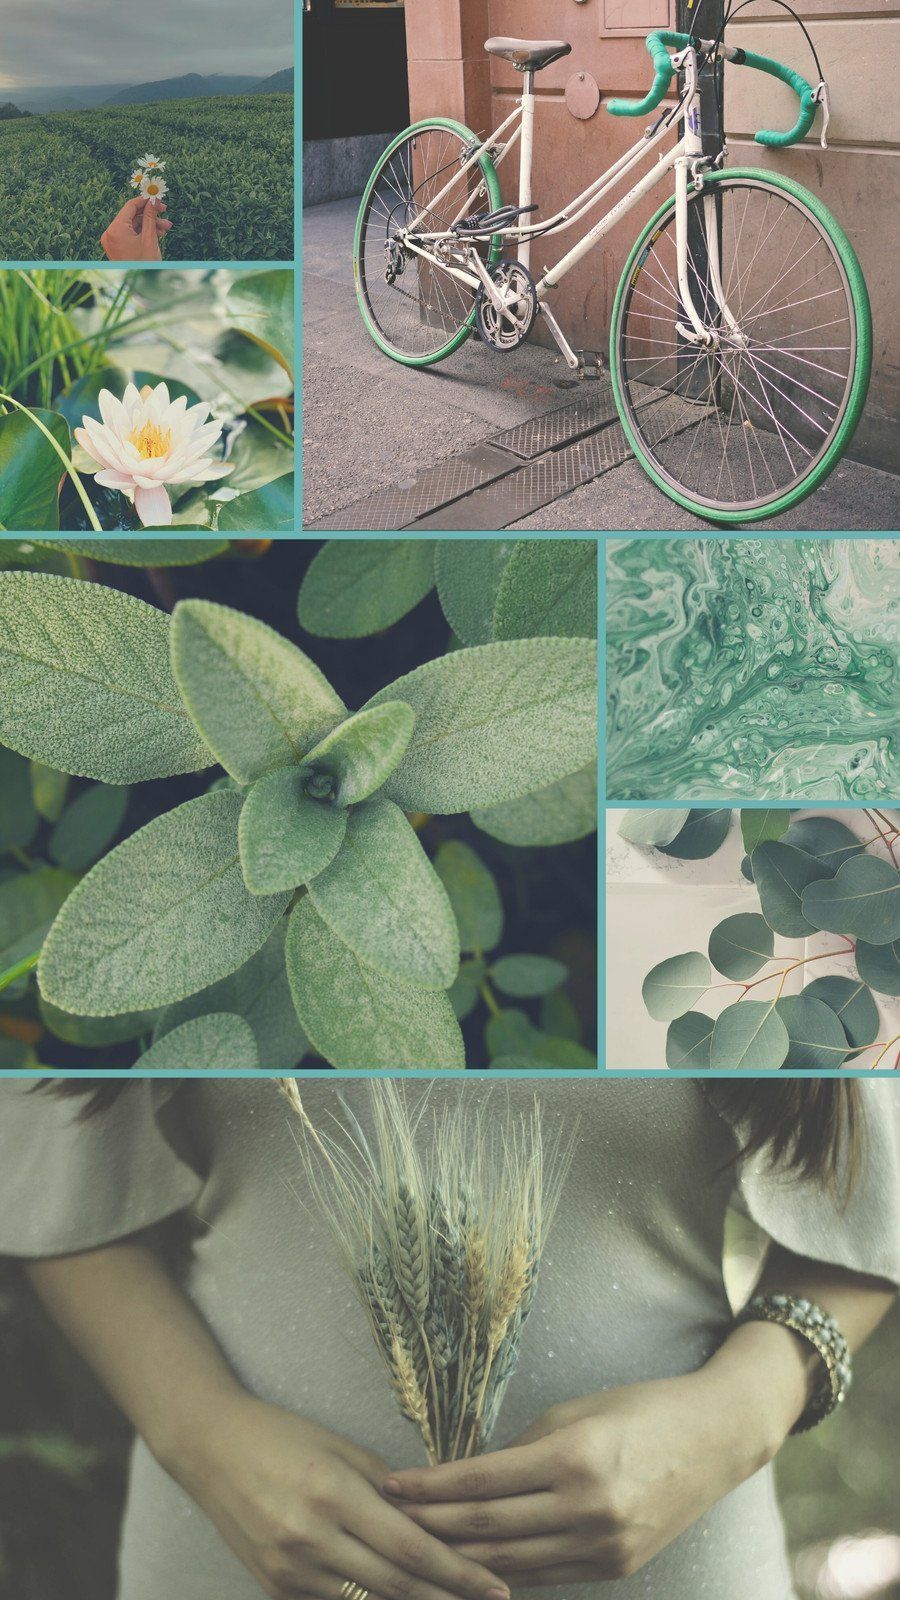 A collage of photos of greenery, a bike, and a girl holding wheat. - Soft green, sage green, light green